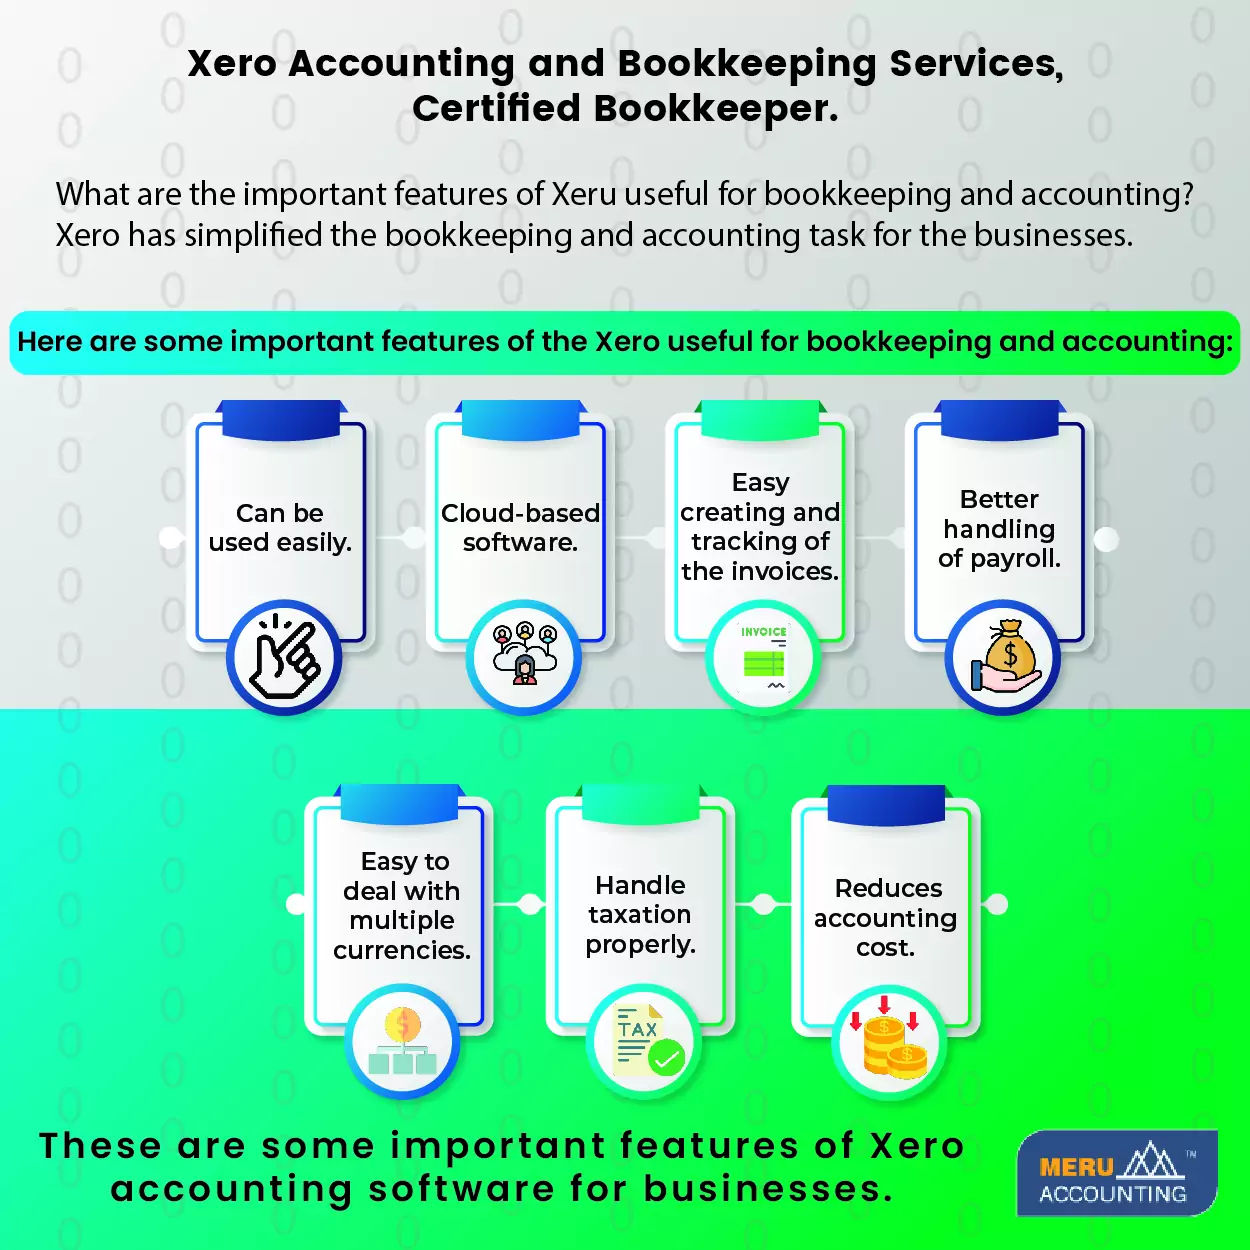 xero-accounting-and-bookkeeping-services-certified-bookkeeper